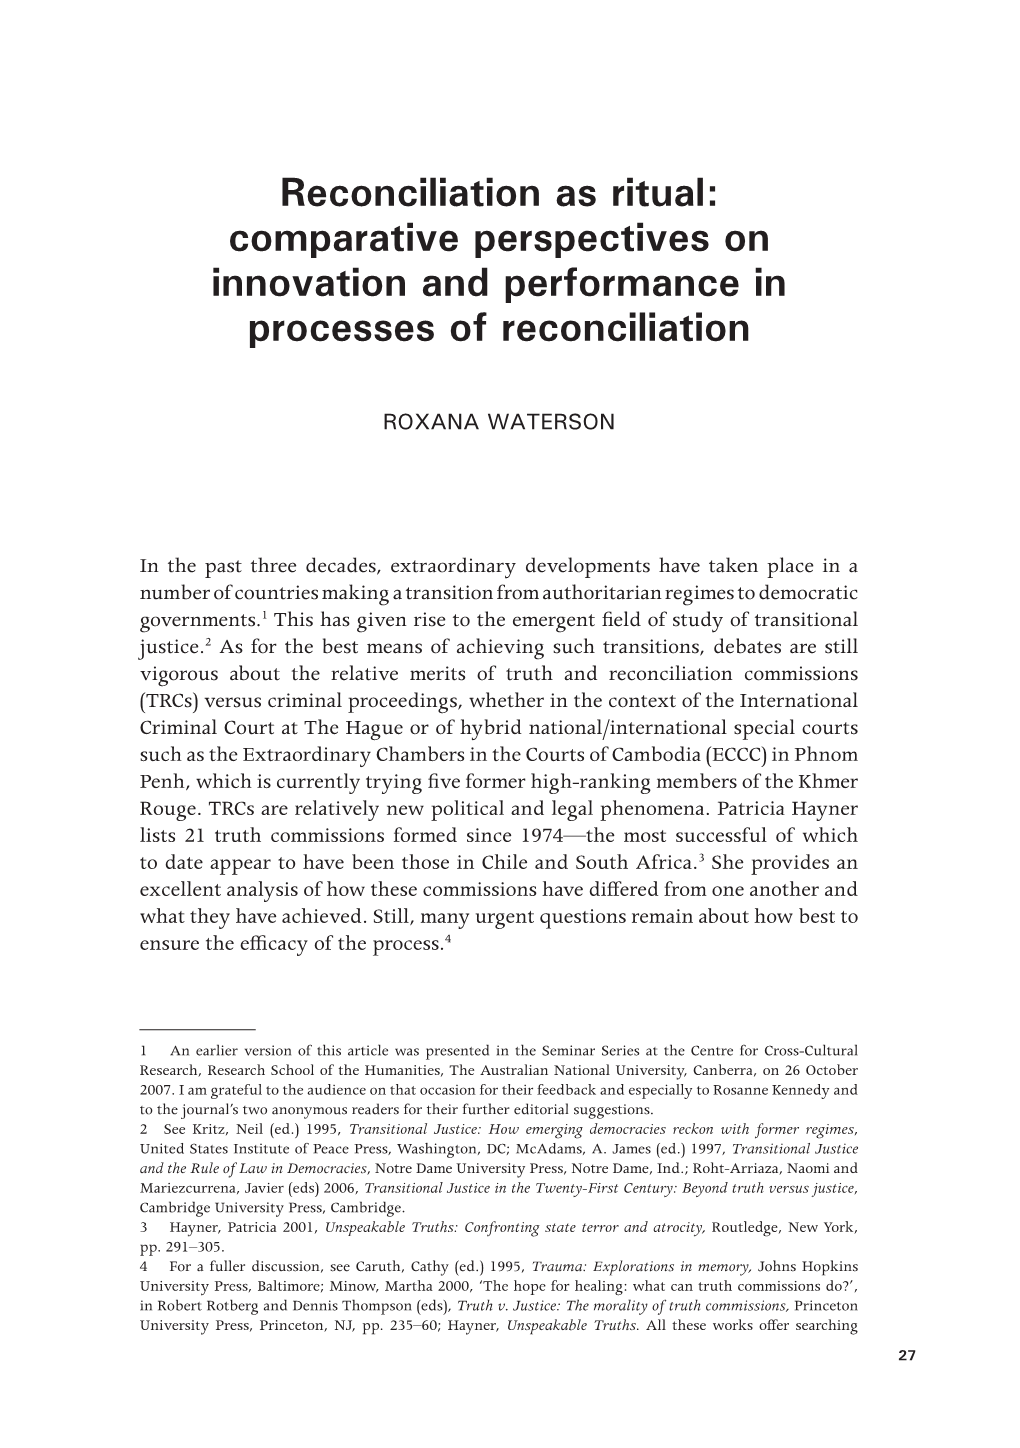 Reconciliation As Ritual: Comparative Perspectives on Innovation and Performance in Processes of Reconciliation